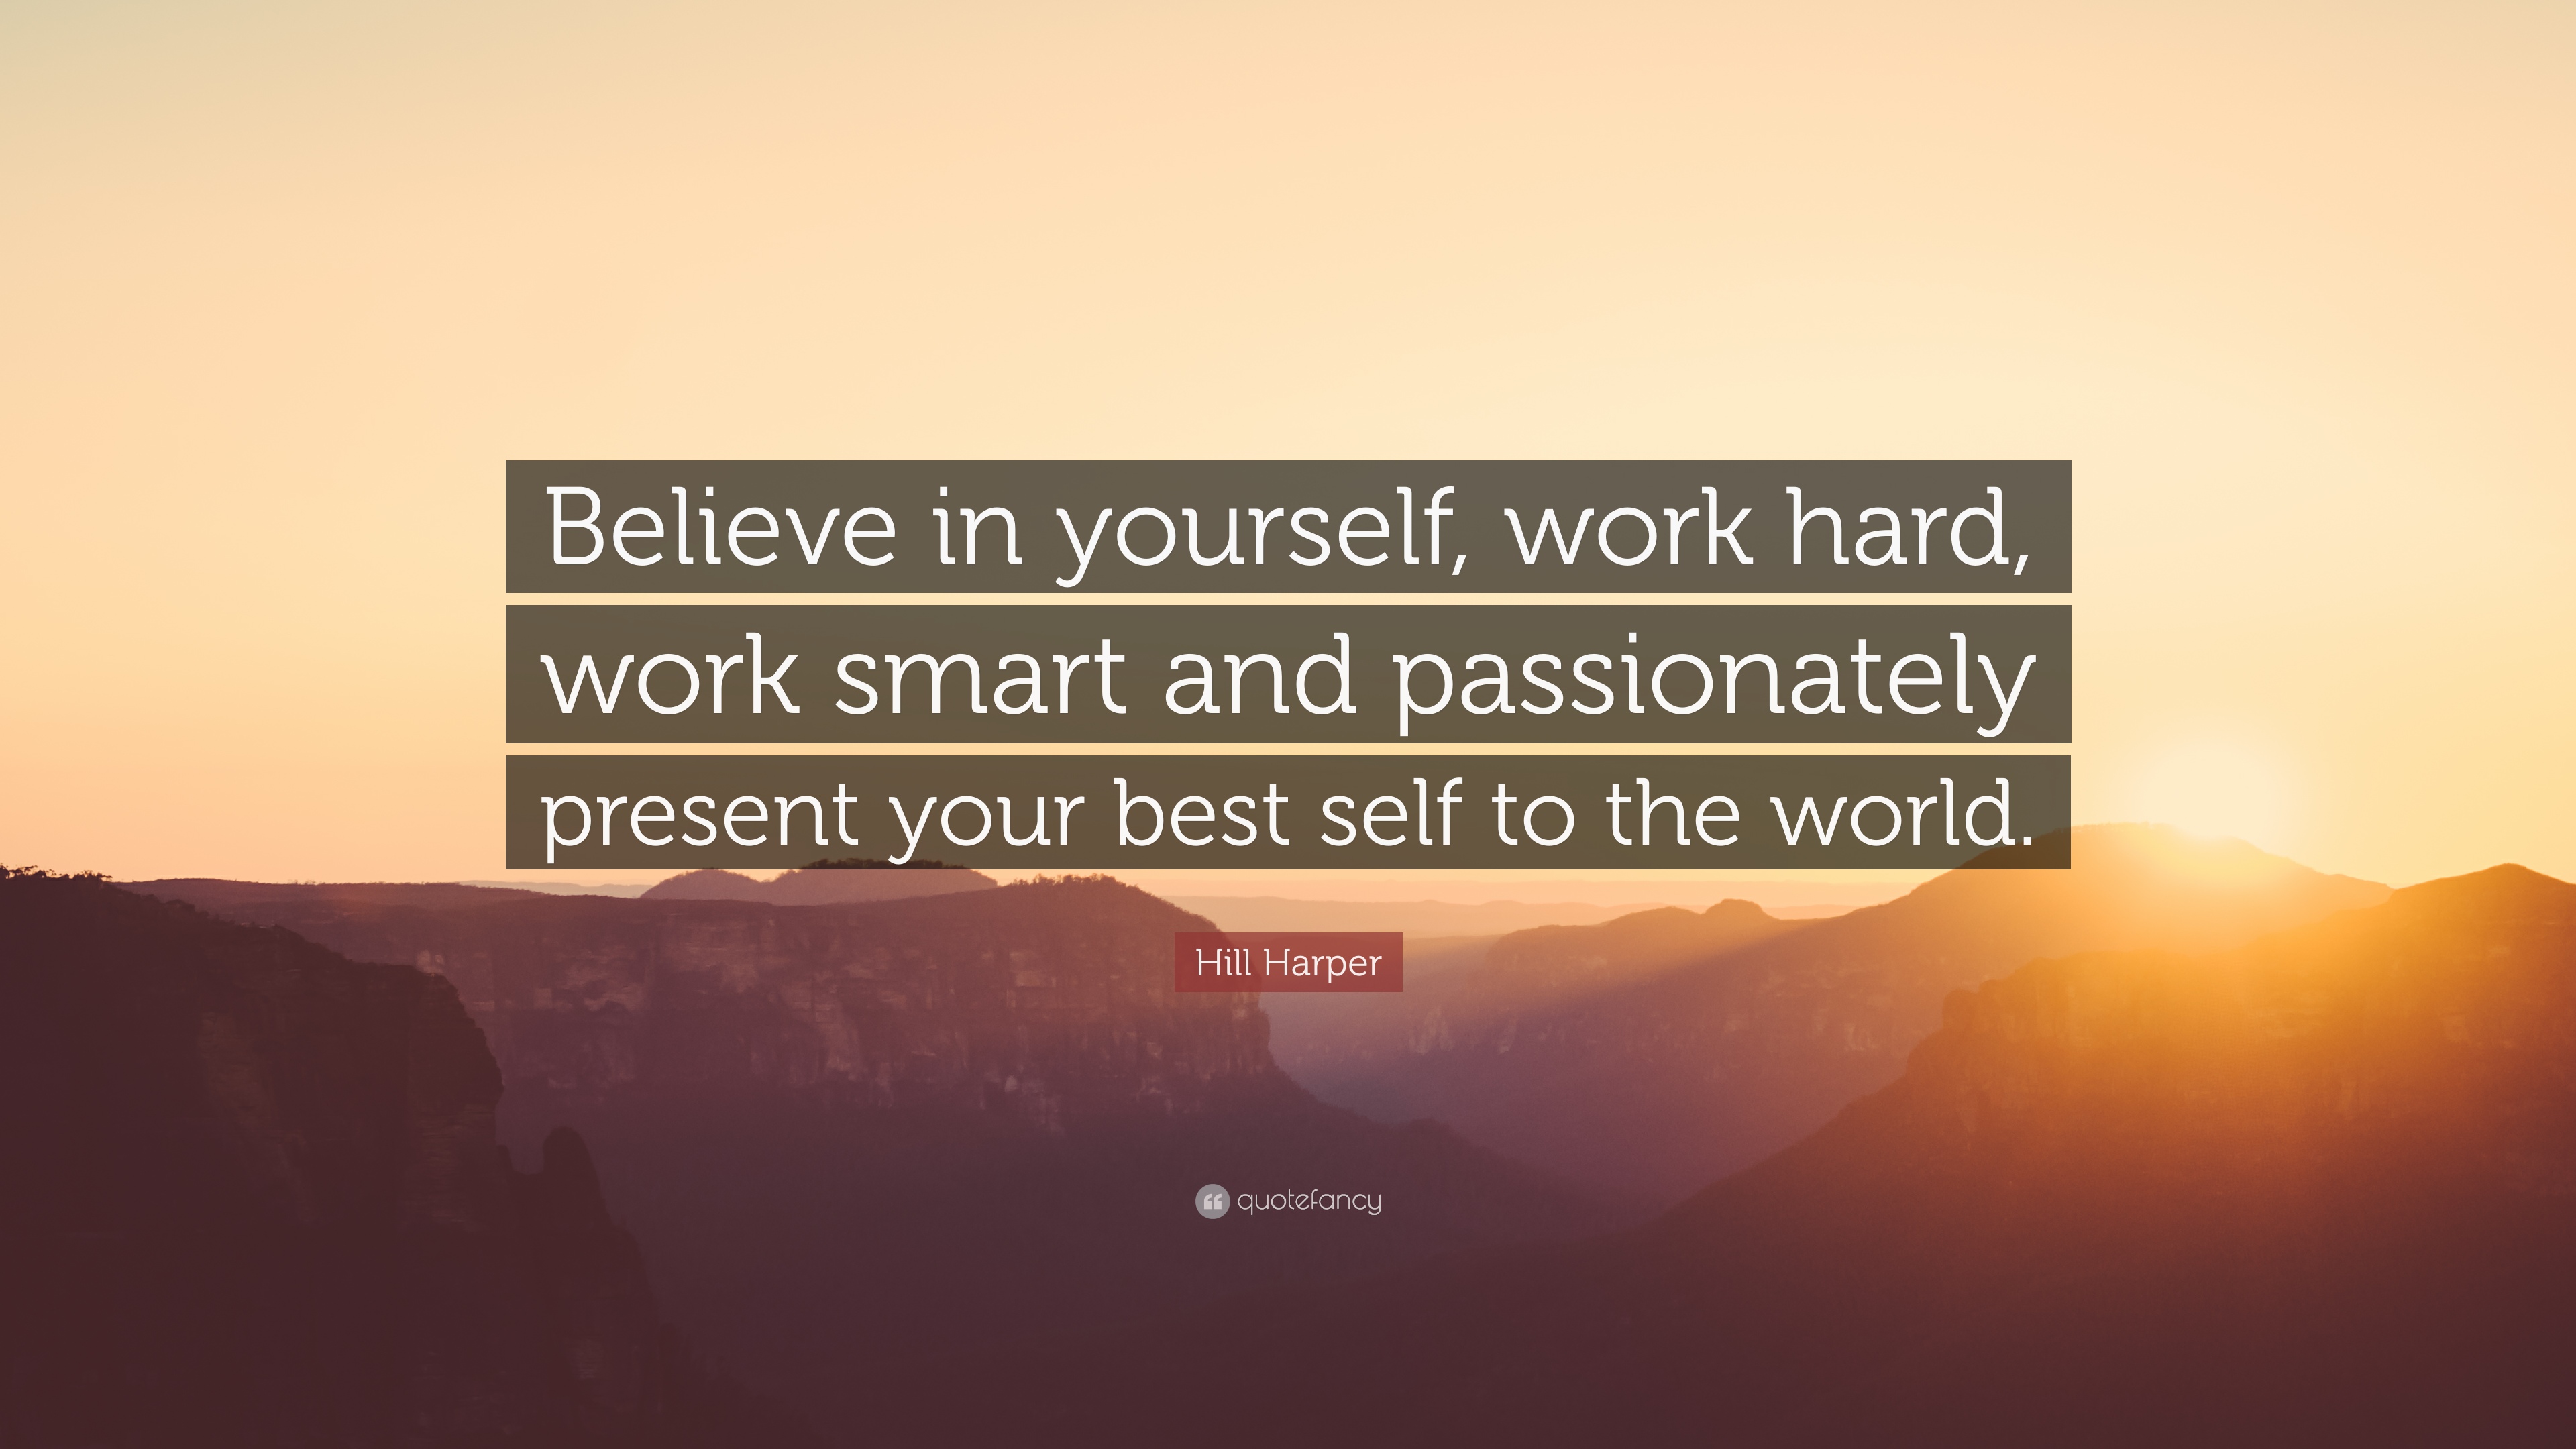 Hill Harper Quote: “Believe in yourself, work hard, work smart and passionately present your best self